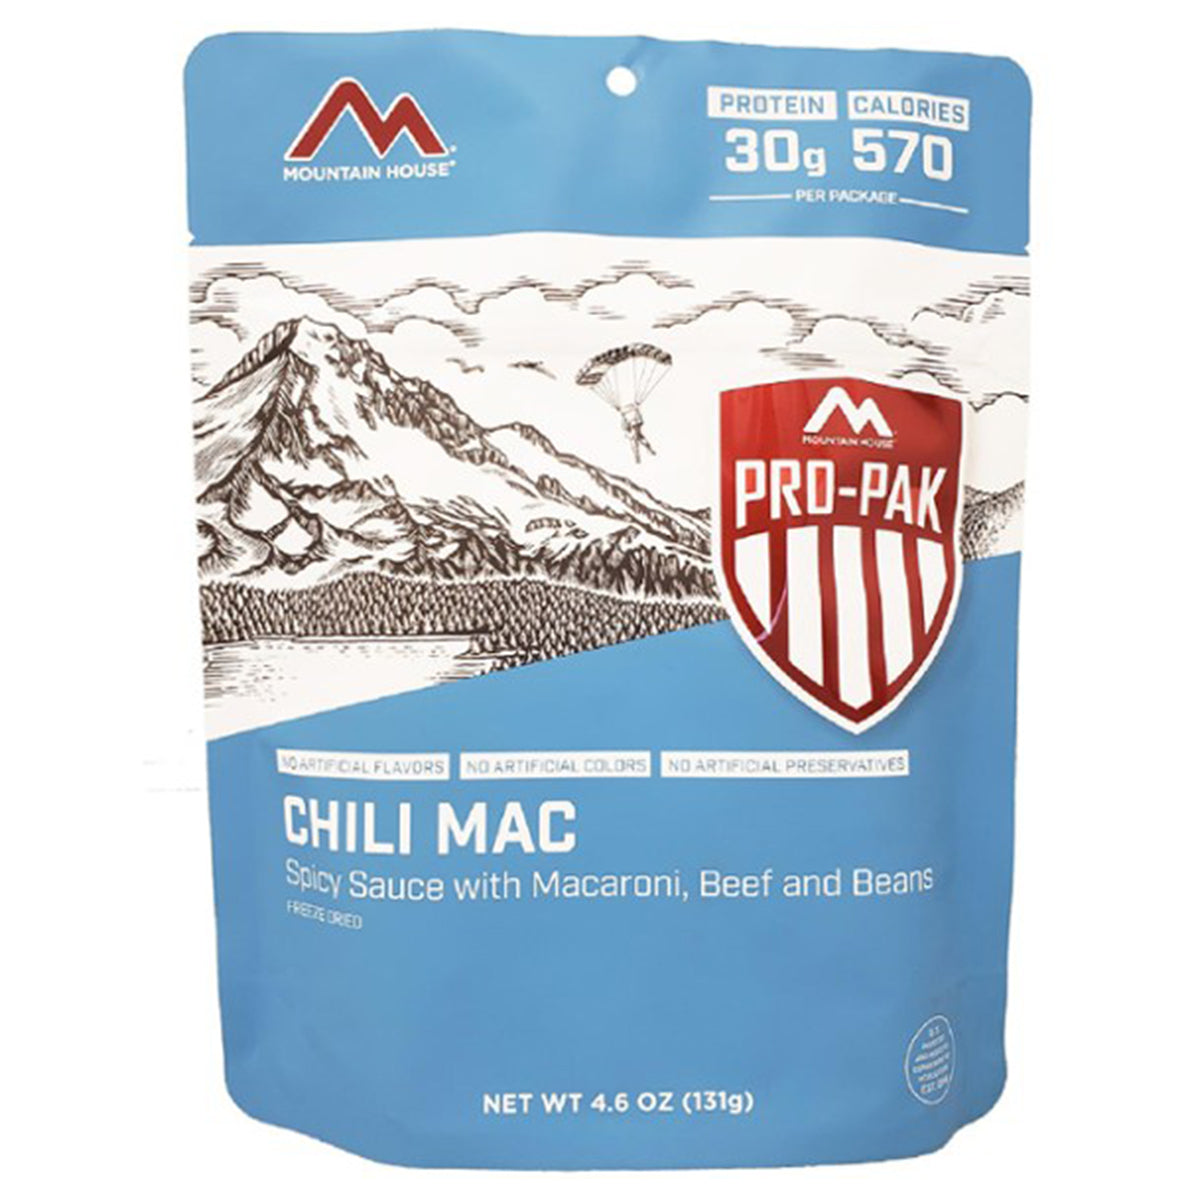 Mountain House Chili Mac with Beef Pro-Pak in Mountain House Chili Mac with Beef Pro-Pak by Mountain House | Camping - goHUNT Shop by GOHUNT | Mountain House - GOHUNT Shop